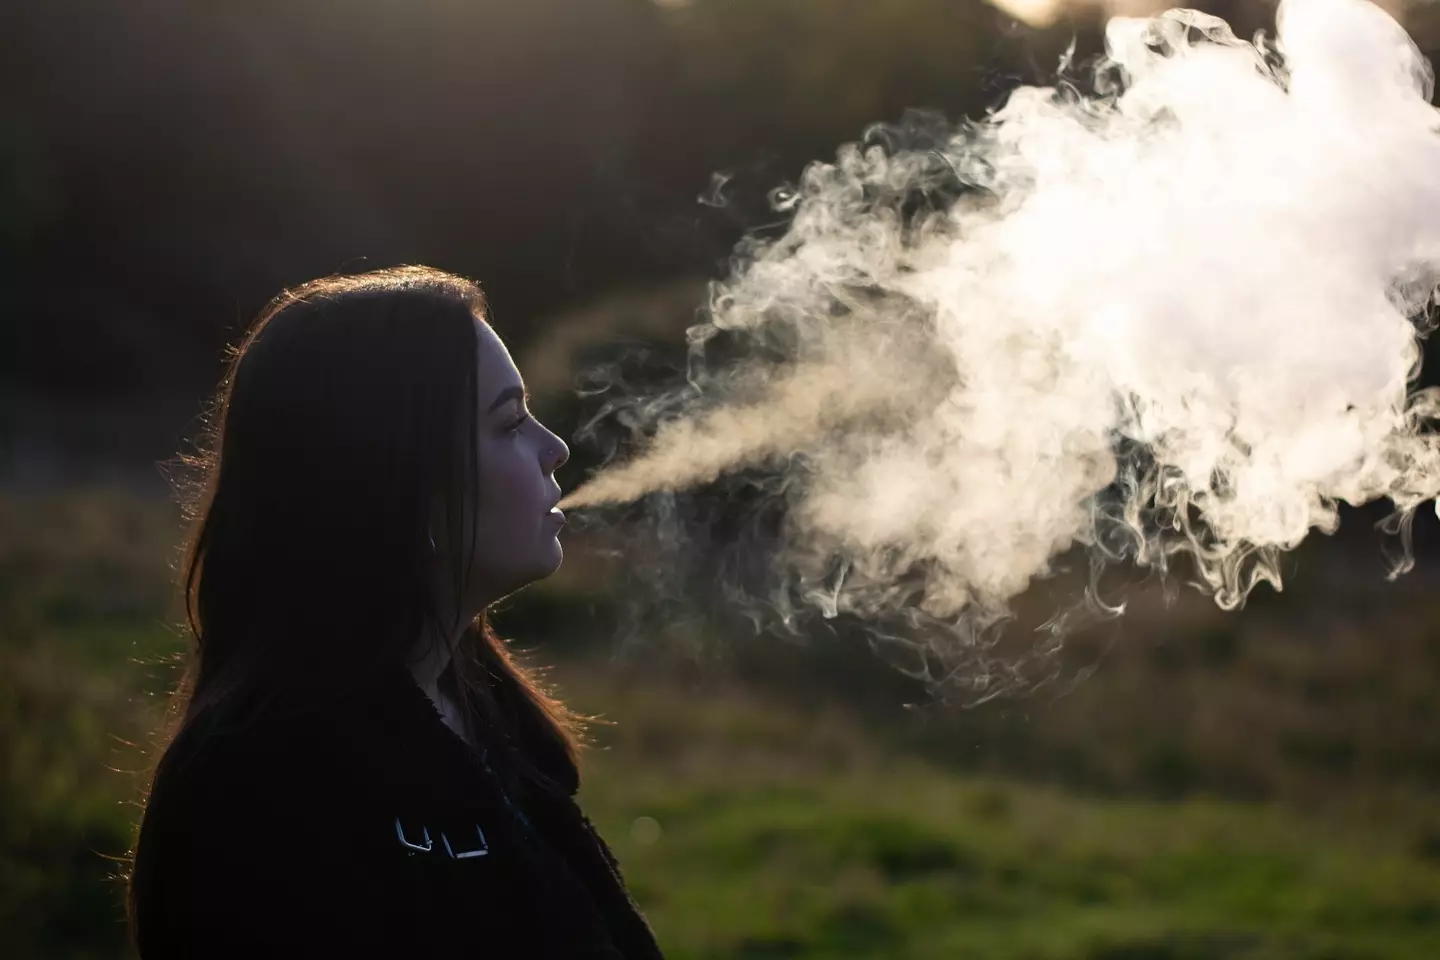 Vaping could be banned amid concerns for young people.